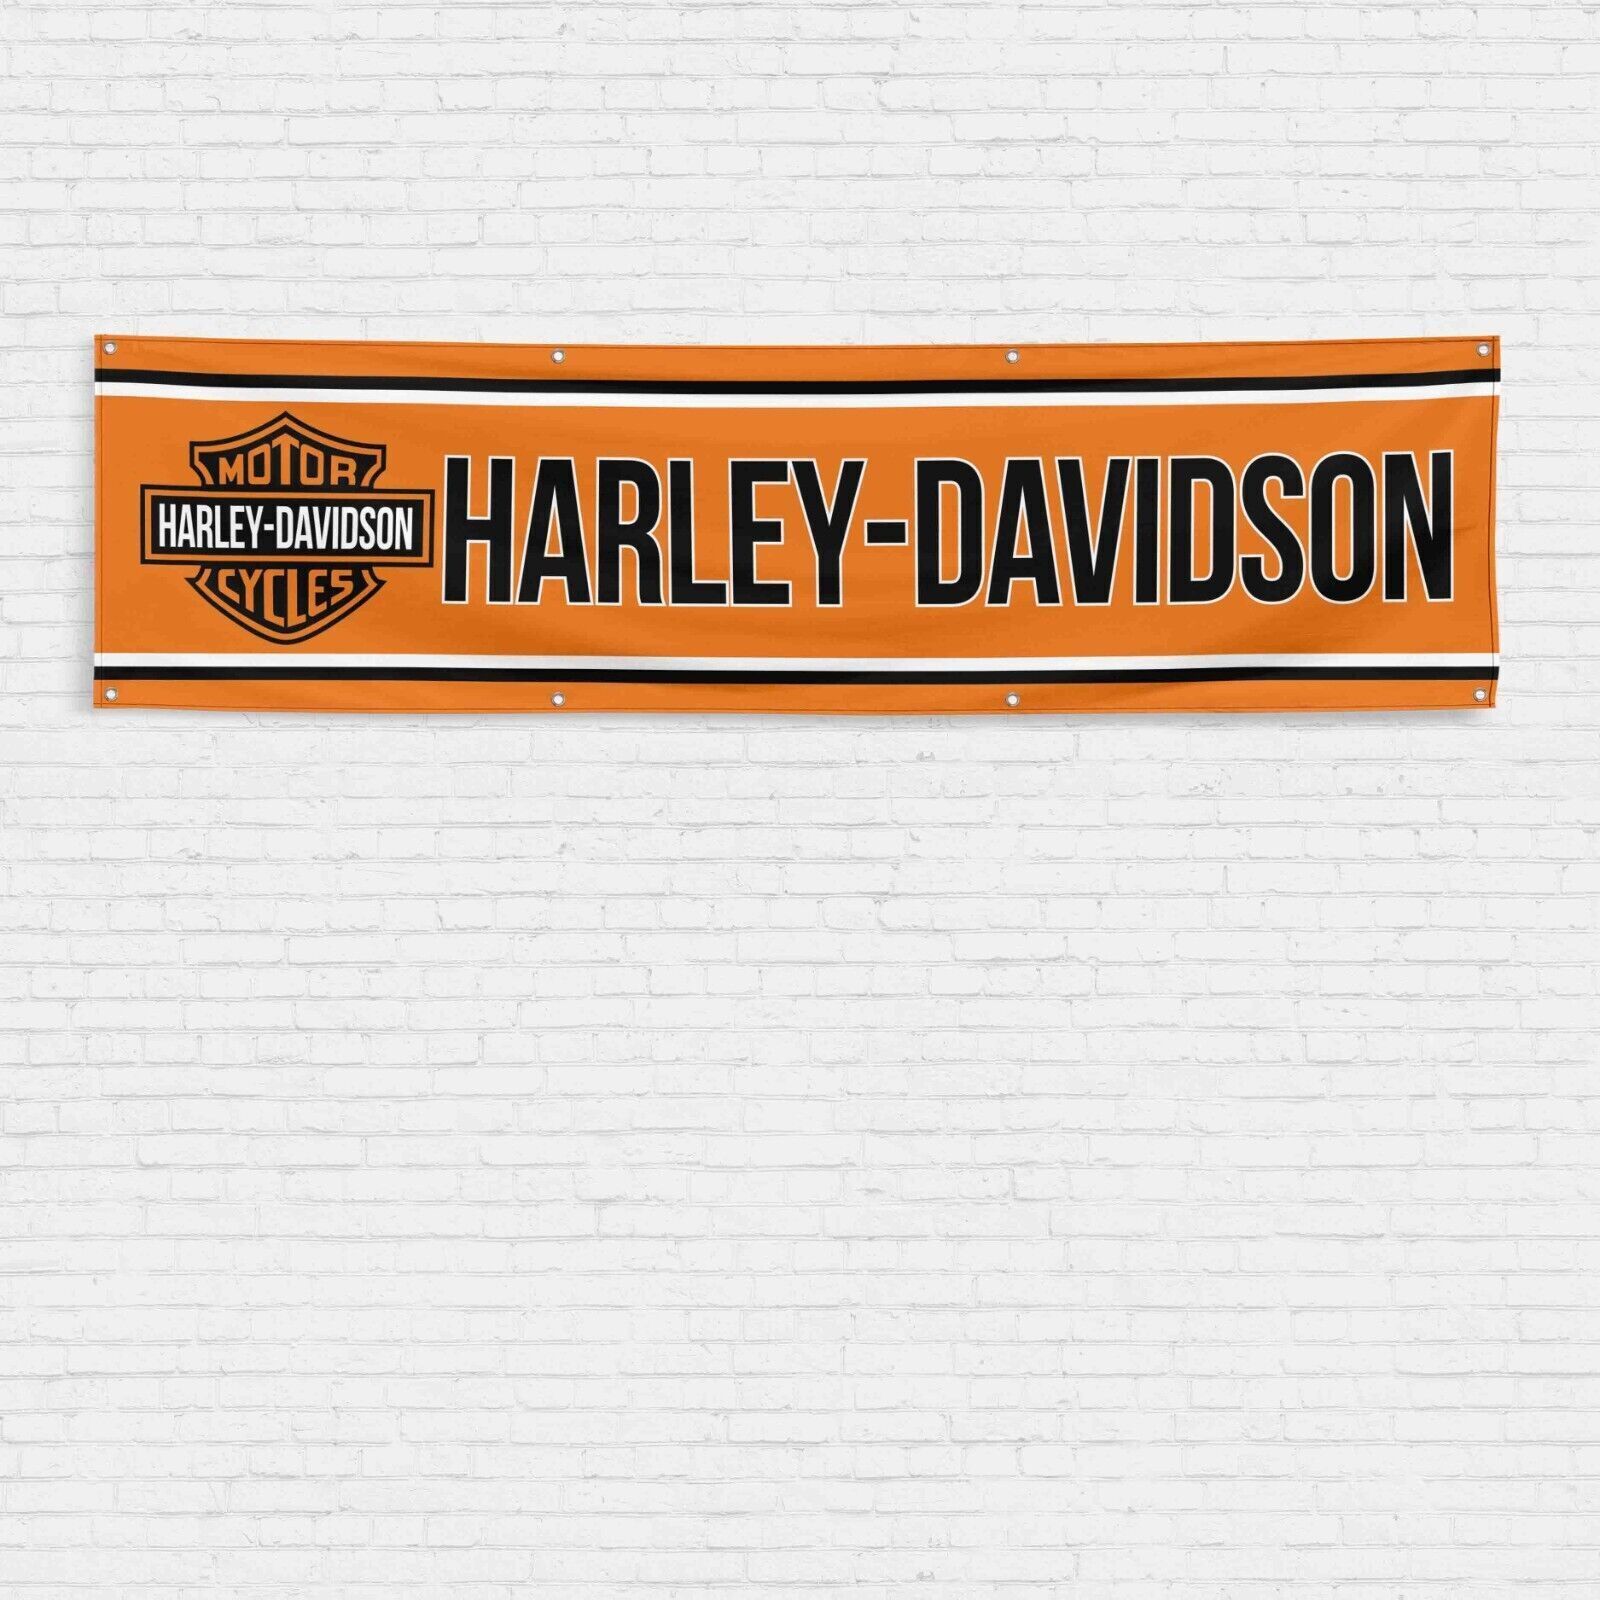 For Harley Davidson Motorcycle Enthusiasts 2x8 ft Flag Man Cave Garage Banner